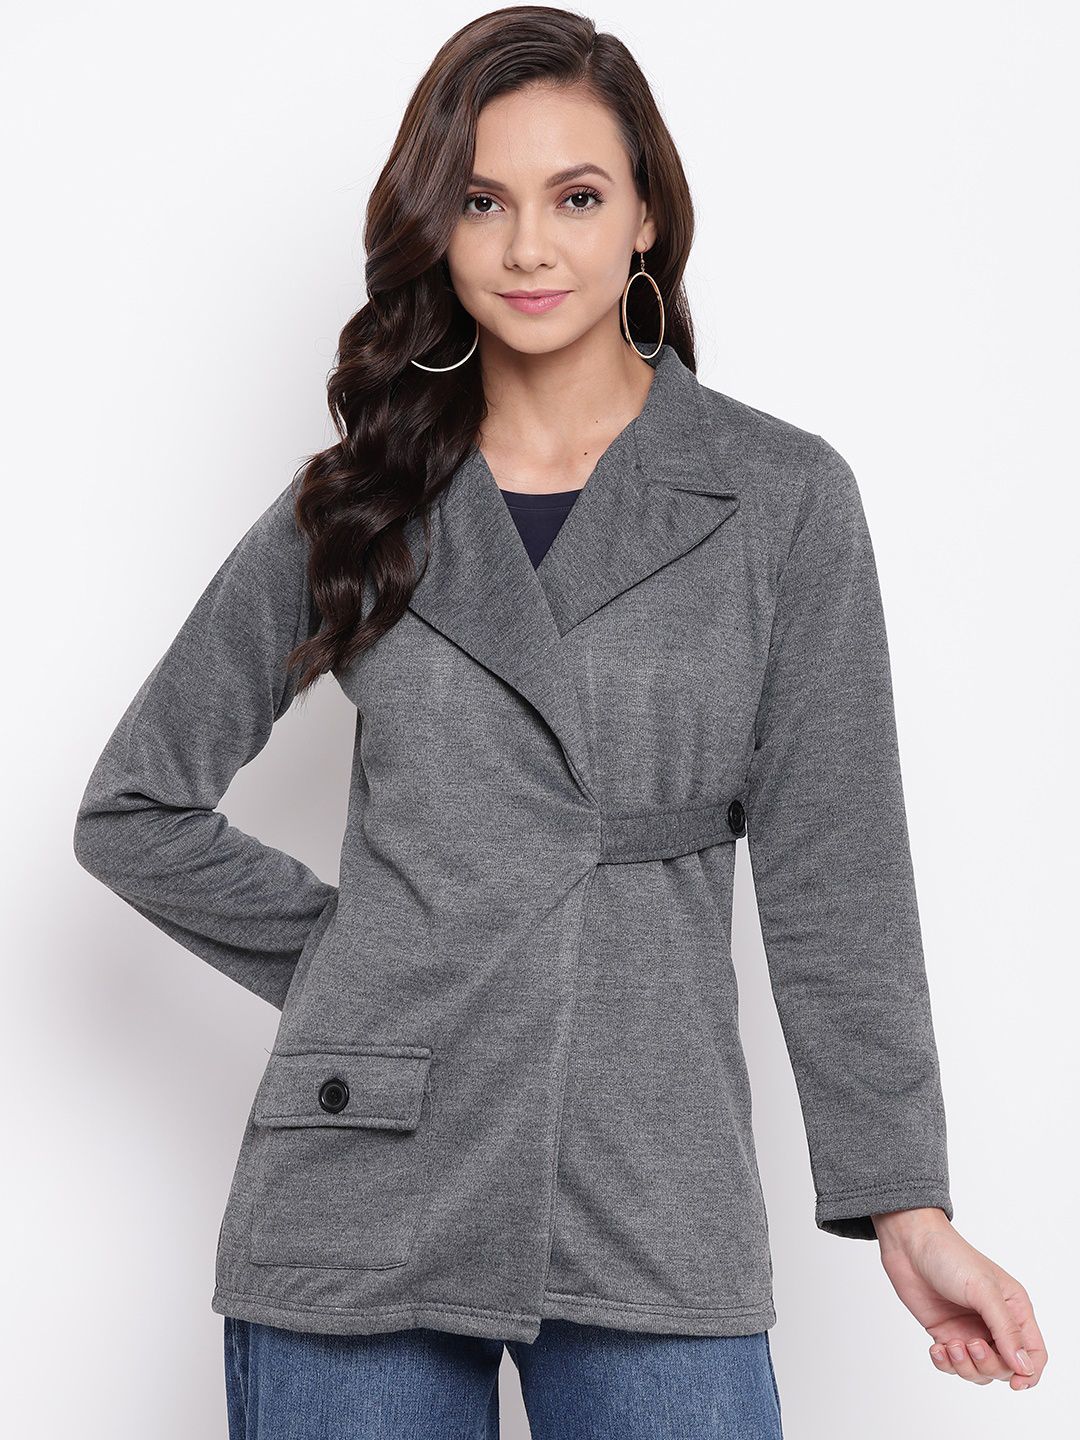 Belle Fille Women Charcoal Grey Solid Tailored Jacket Price in India